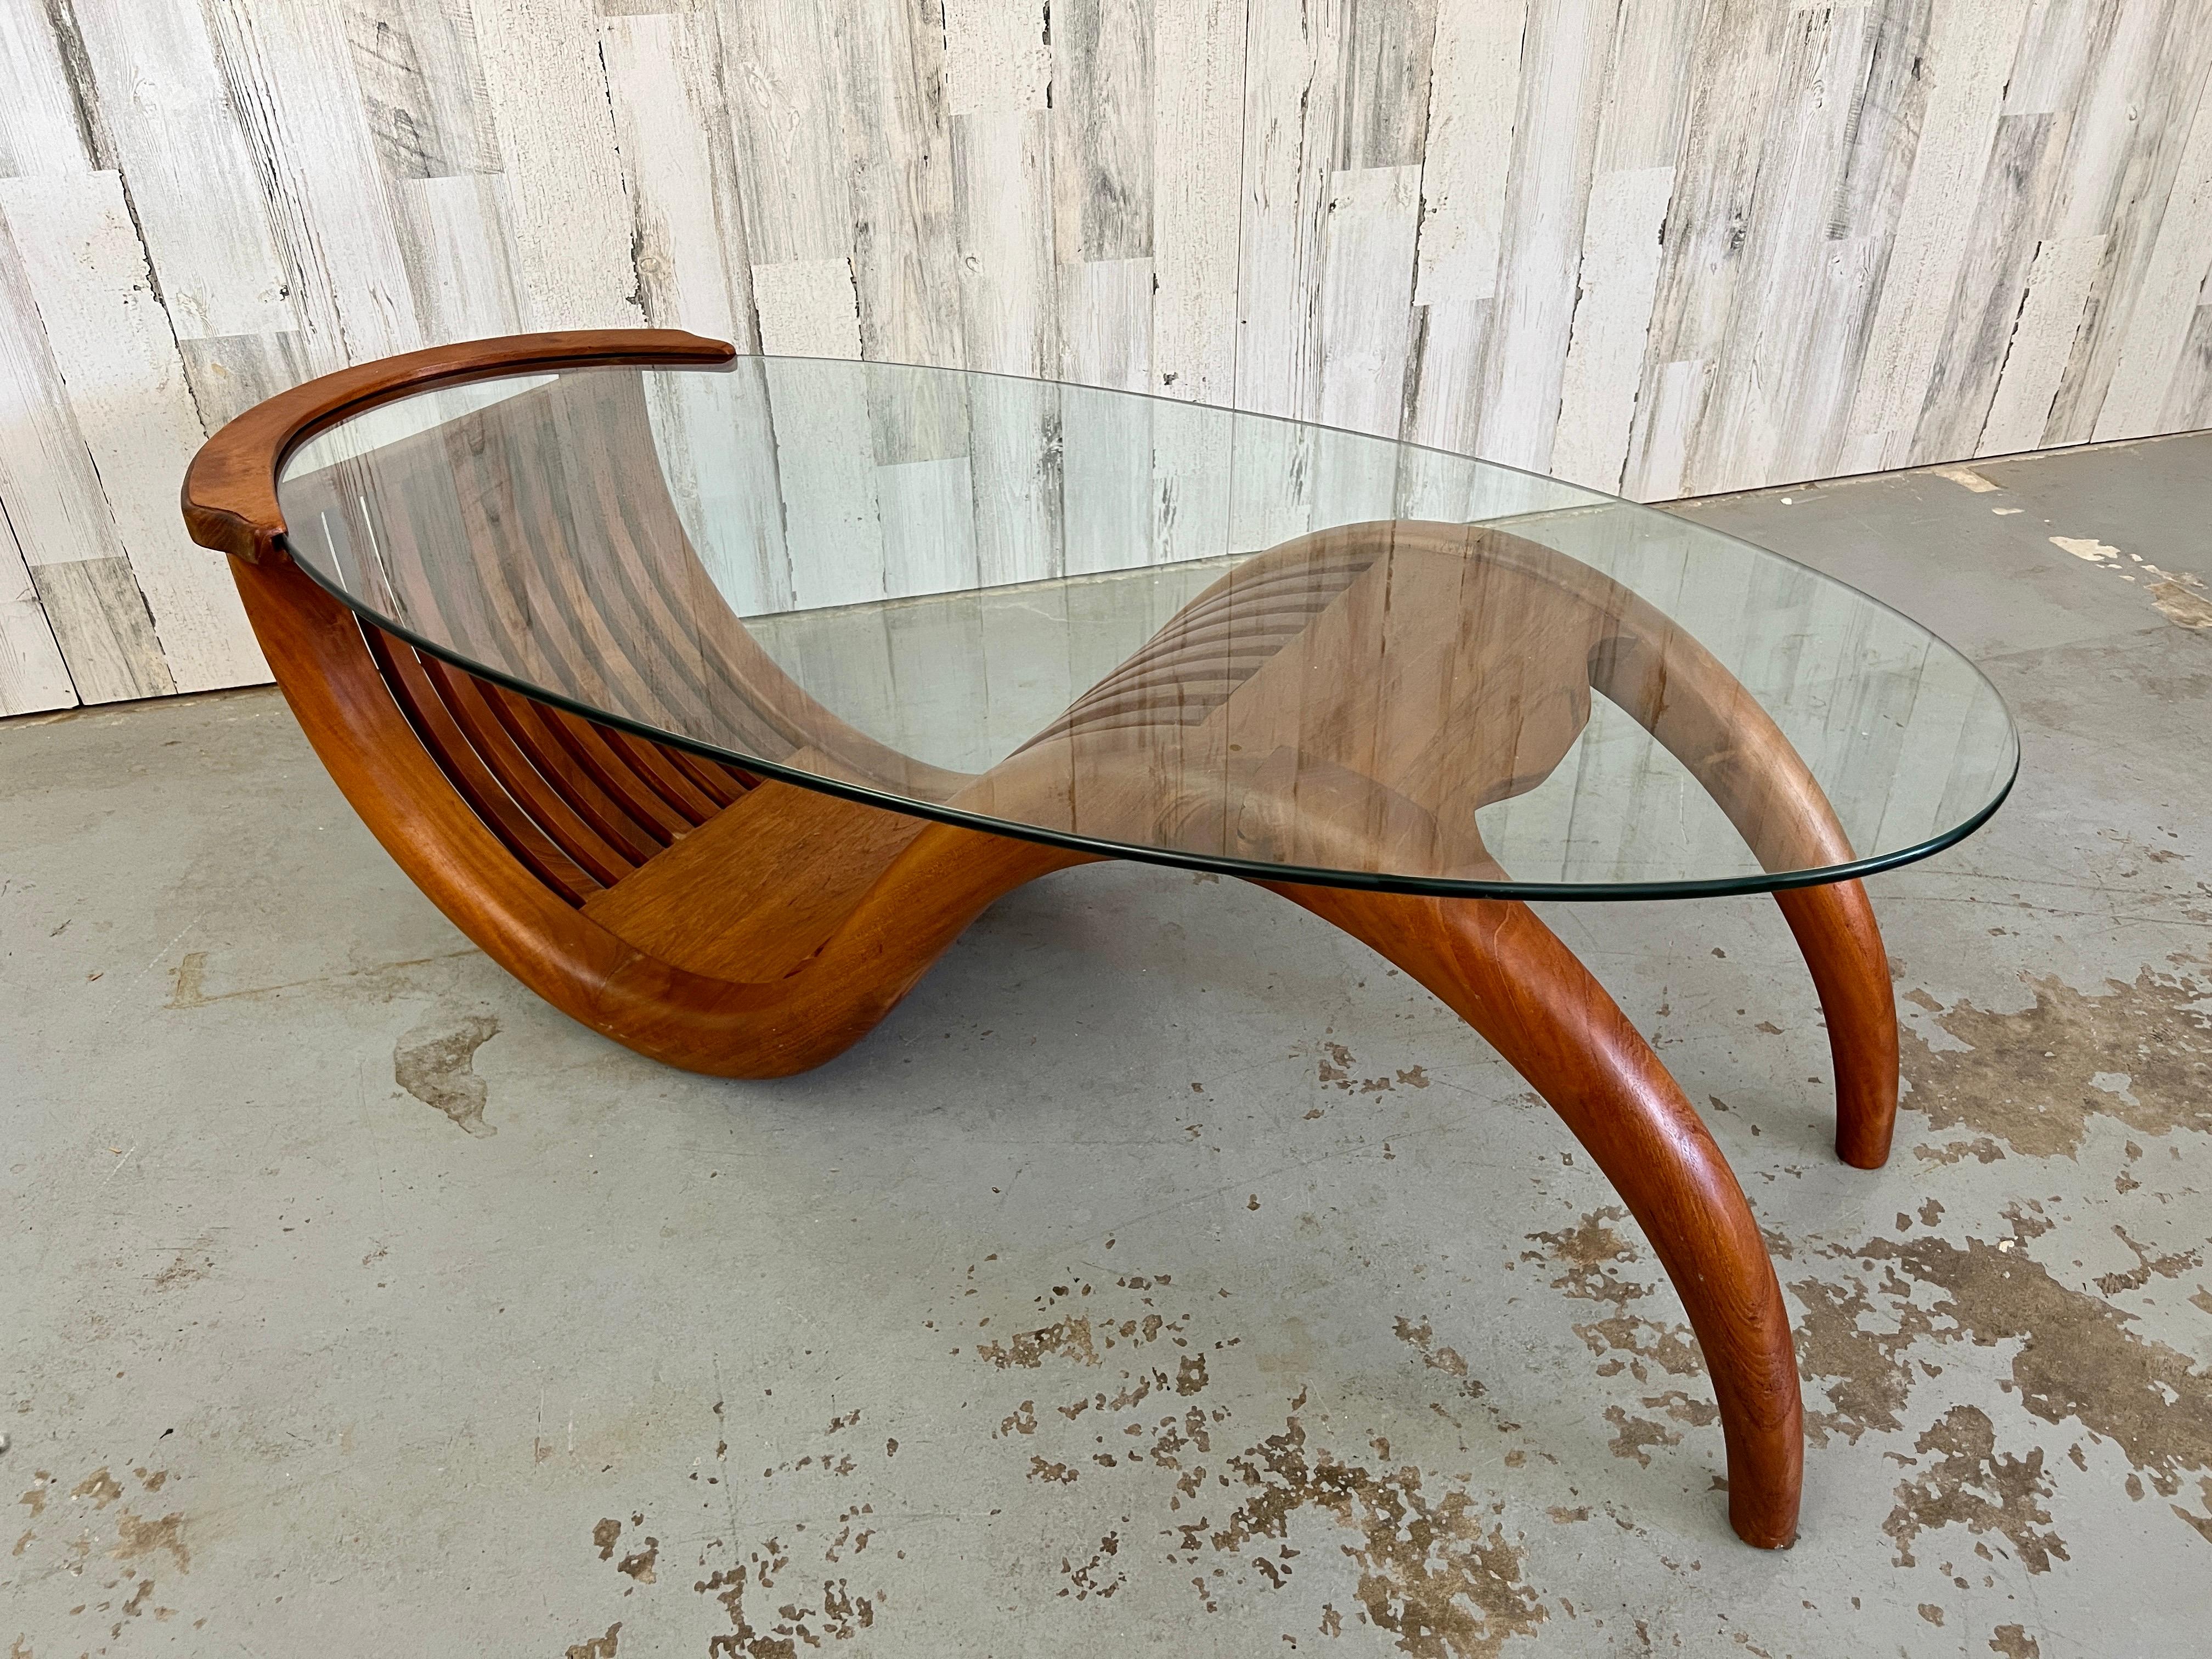 Scandinavian Modern Sculpted Teak with Oval Glass Coffee Table For Sale